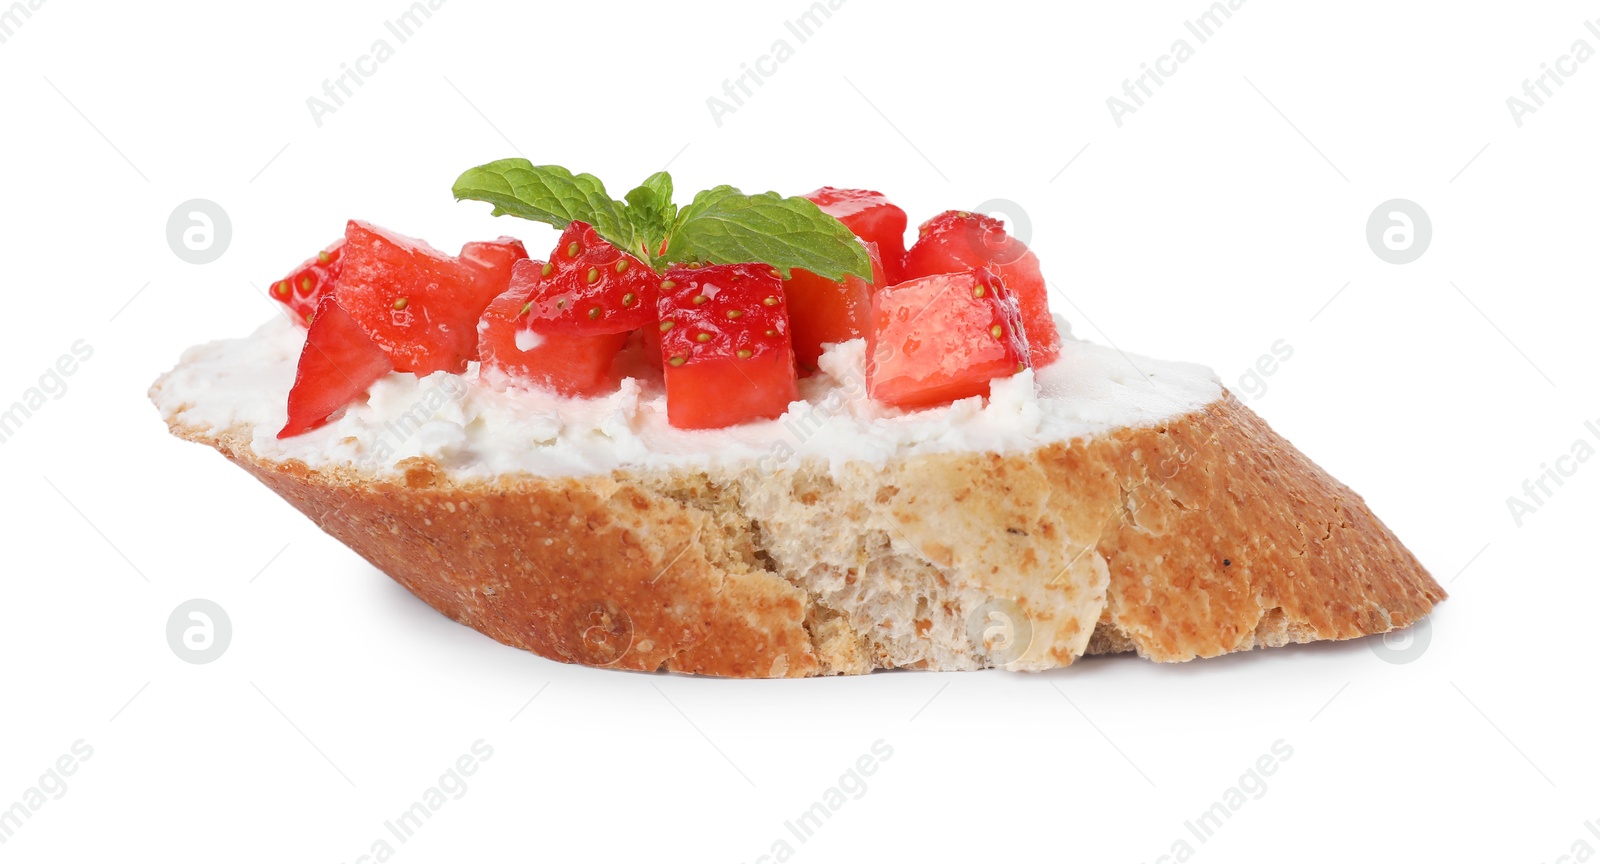 Photo of Delicious ricotta bruschetta with strawberry and mint isolated on white